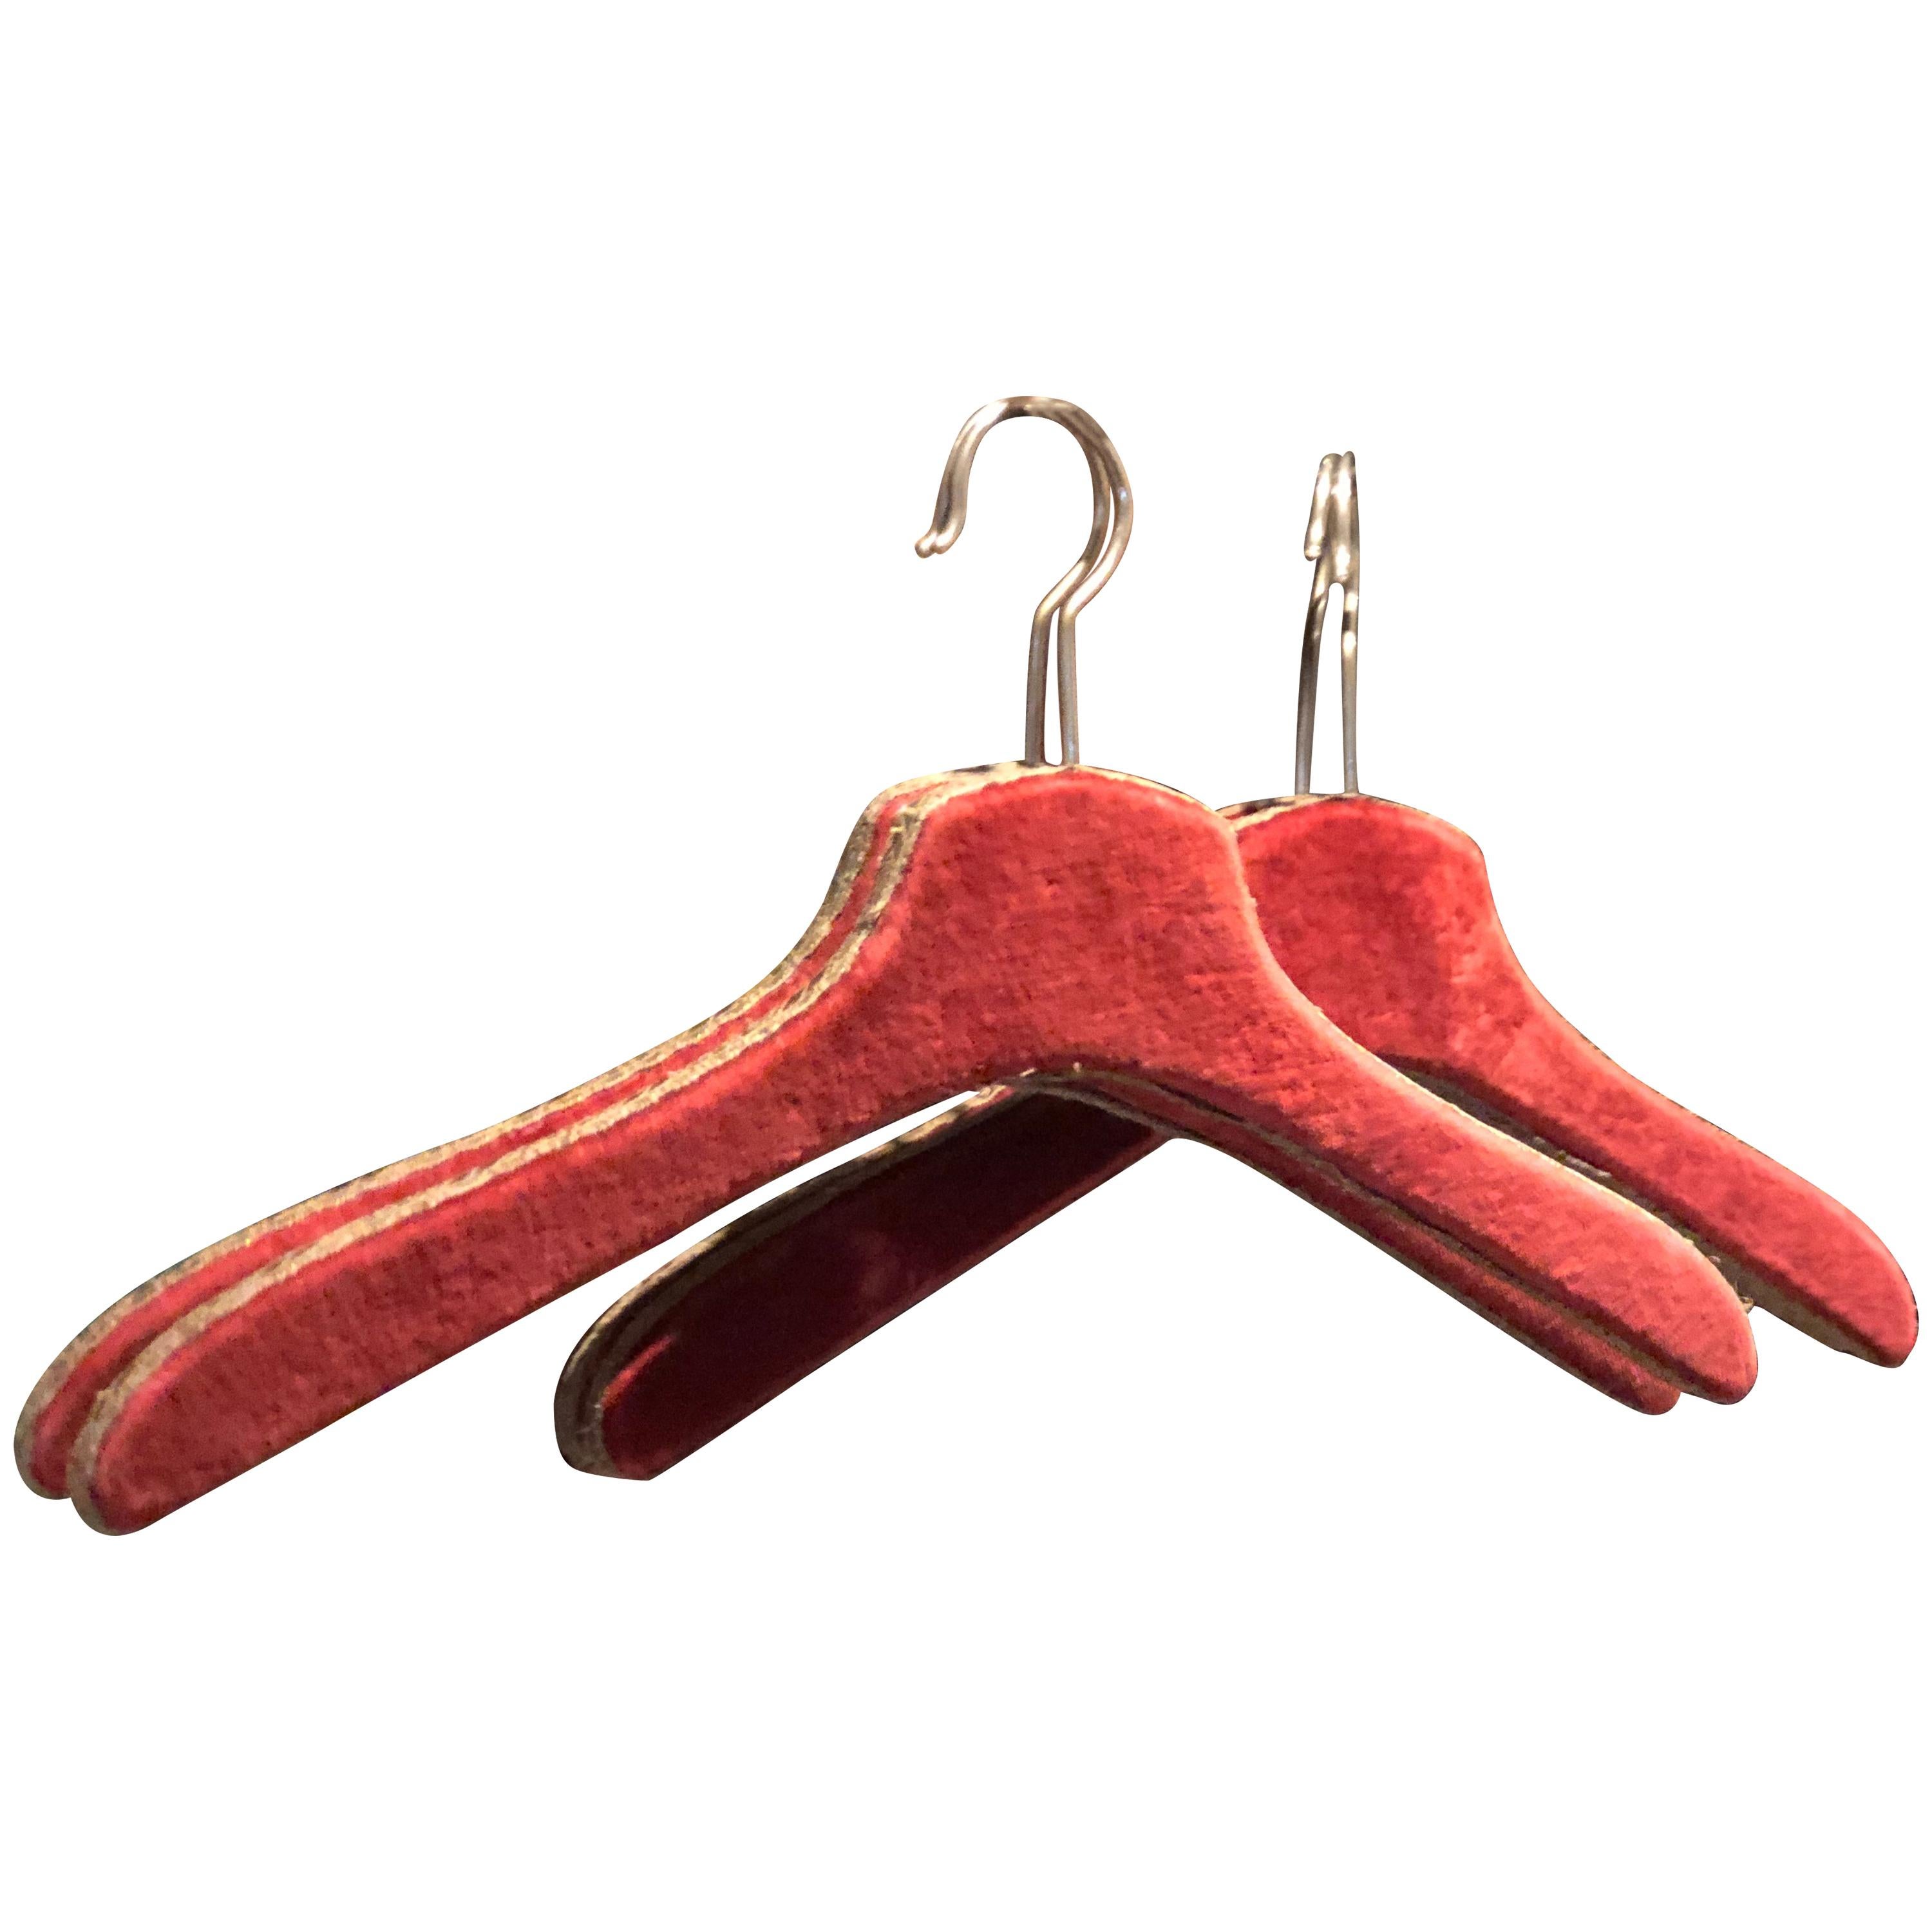 Set of Five French Antique Clothes Hangers in Red Velvet